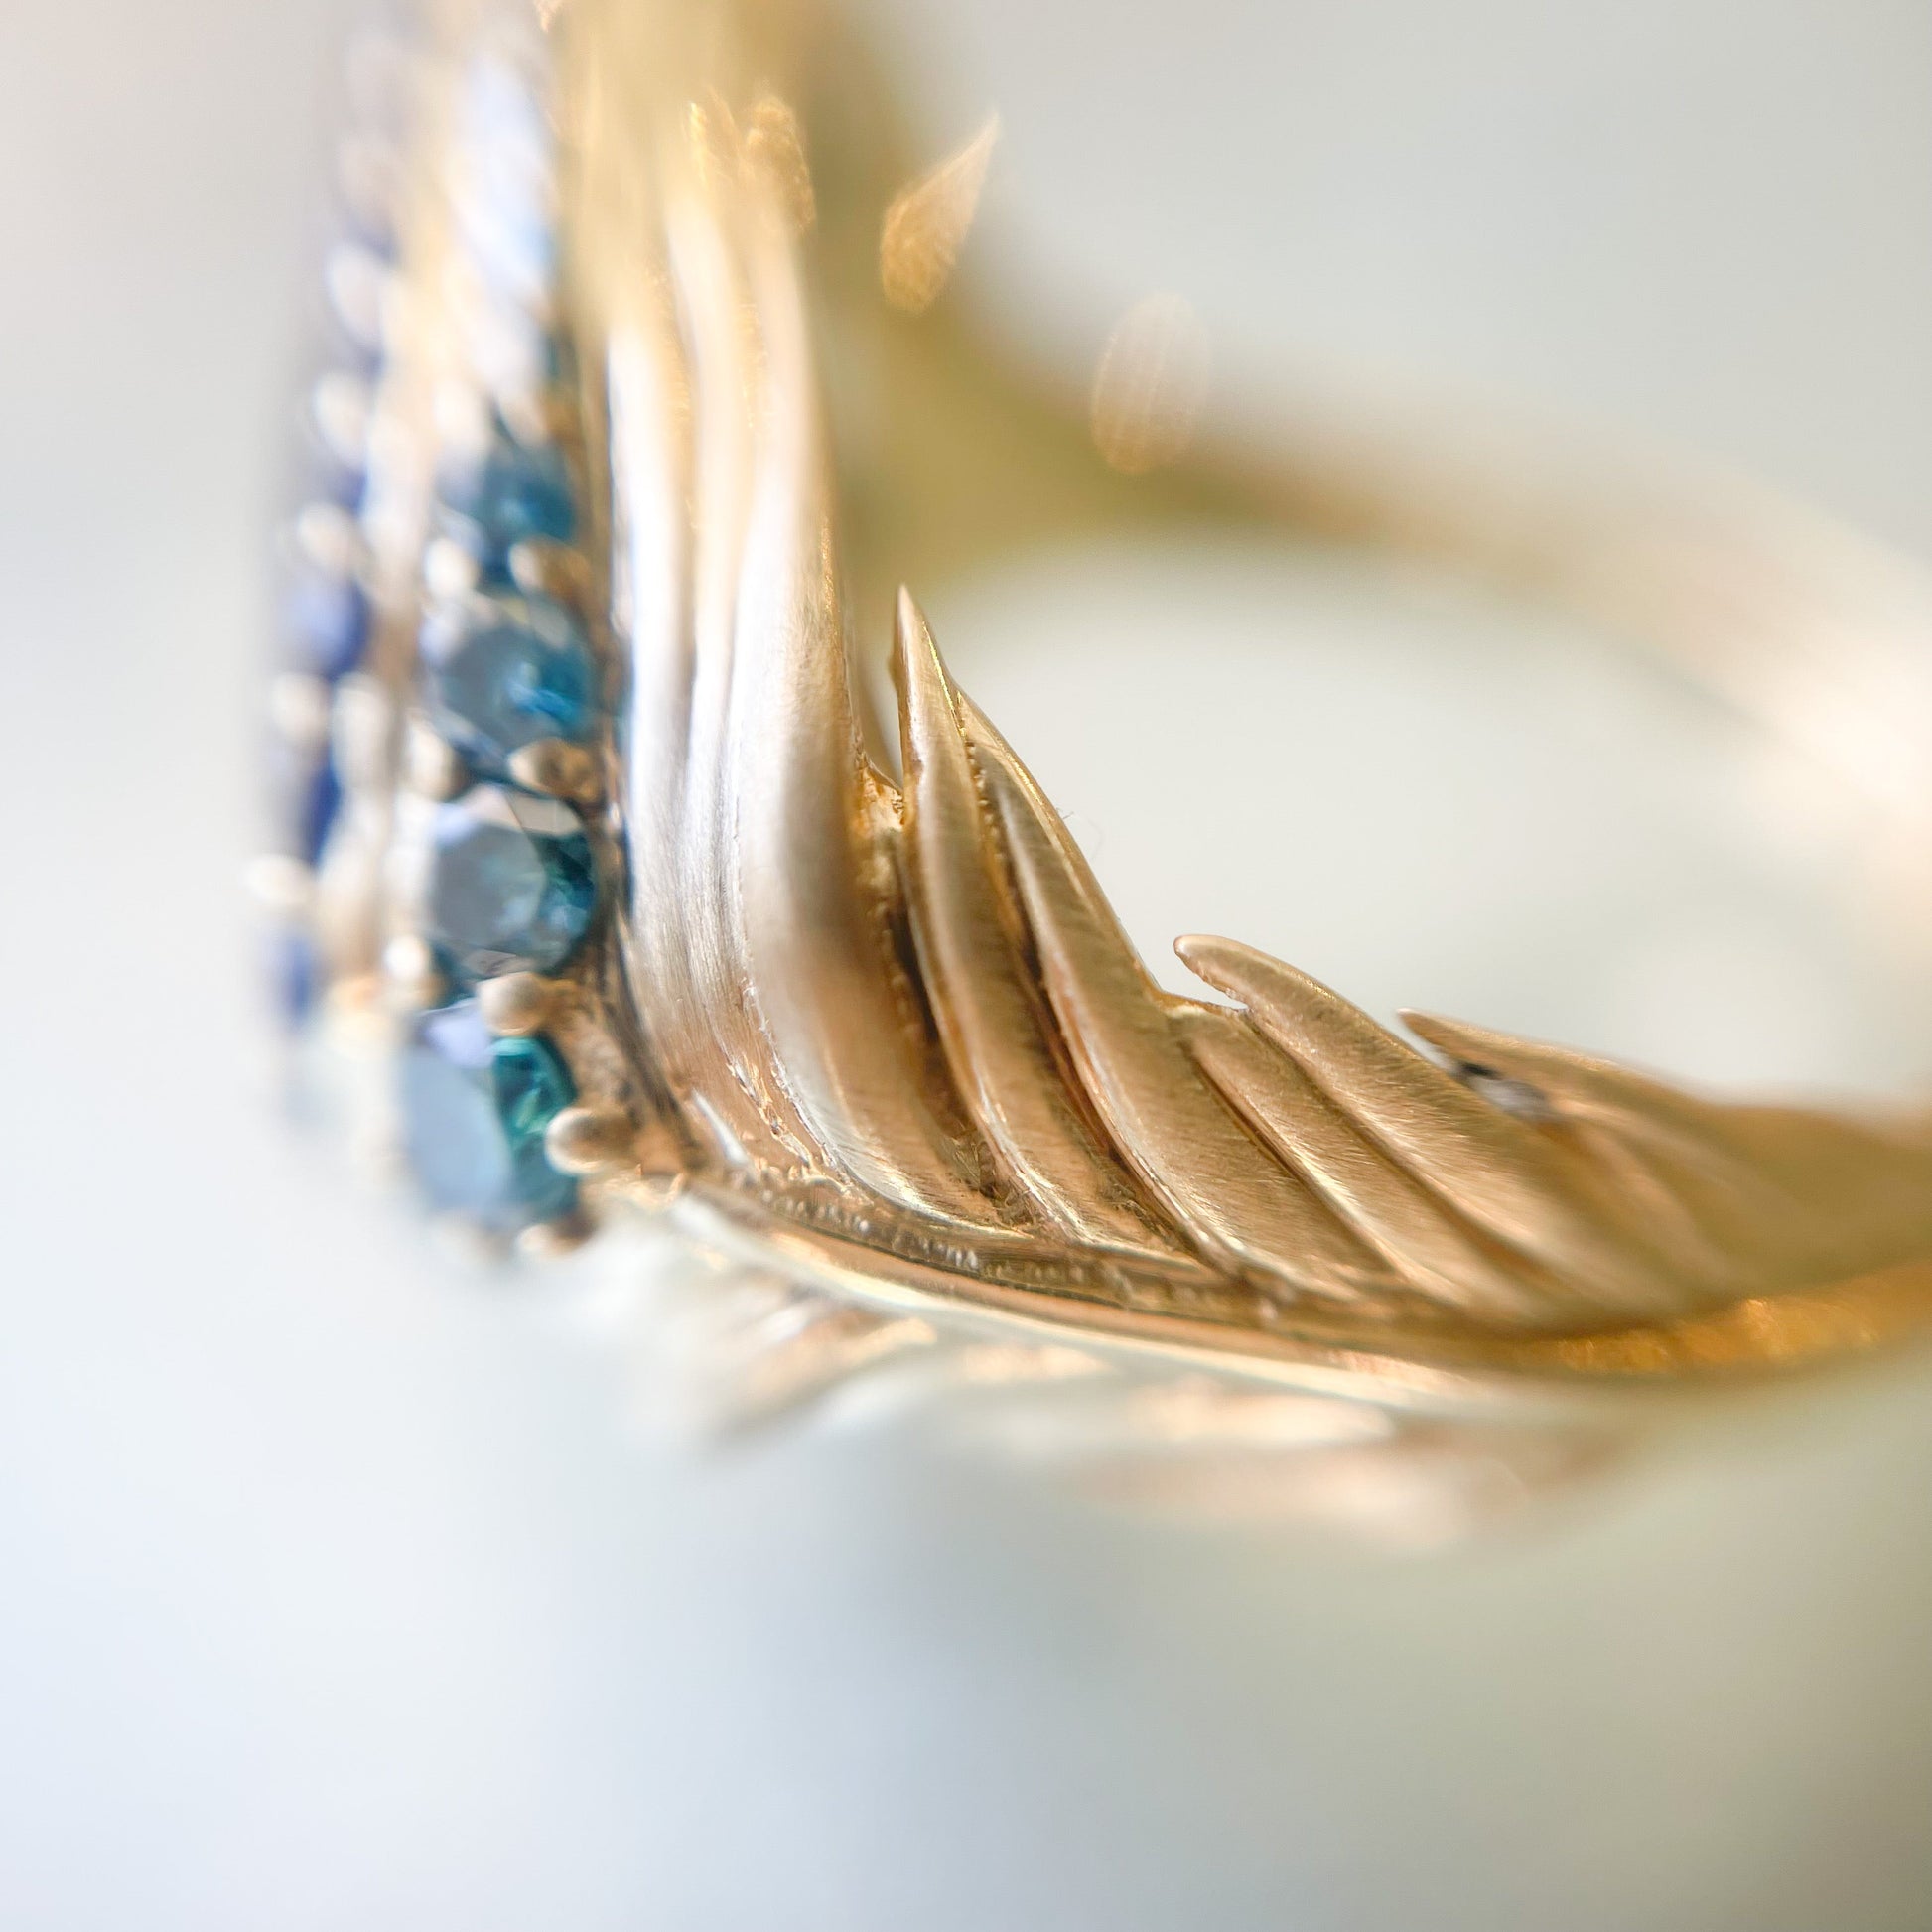 Australian Opal Ring by NIXIN Jewelry showing magnified detail of gold feather band. Opal Ring with peacock feather design.